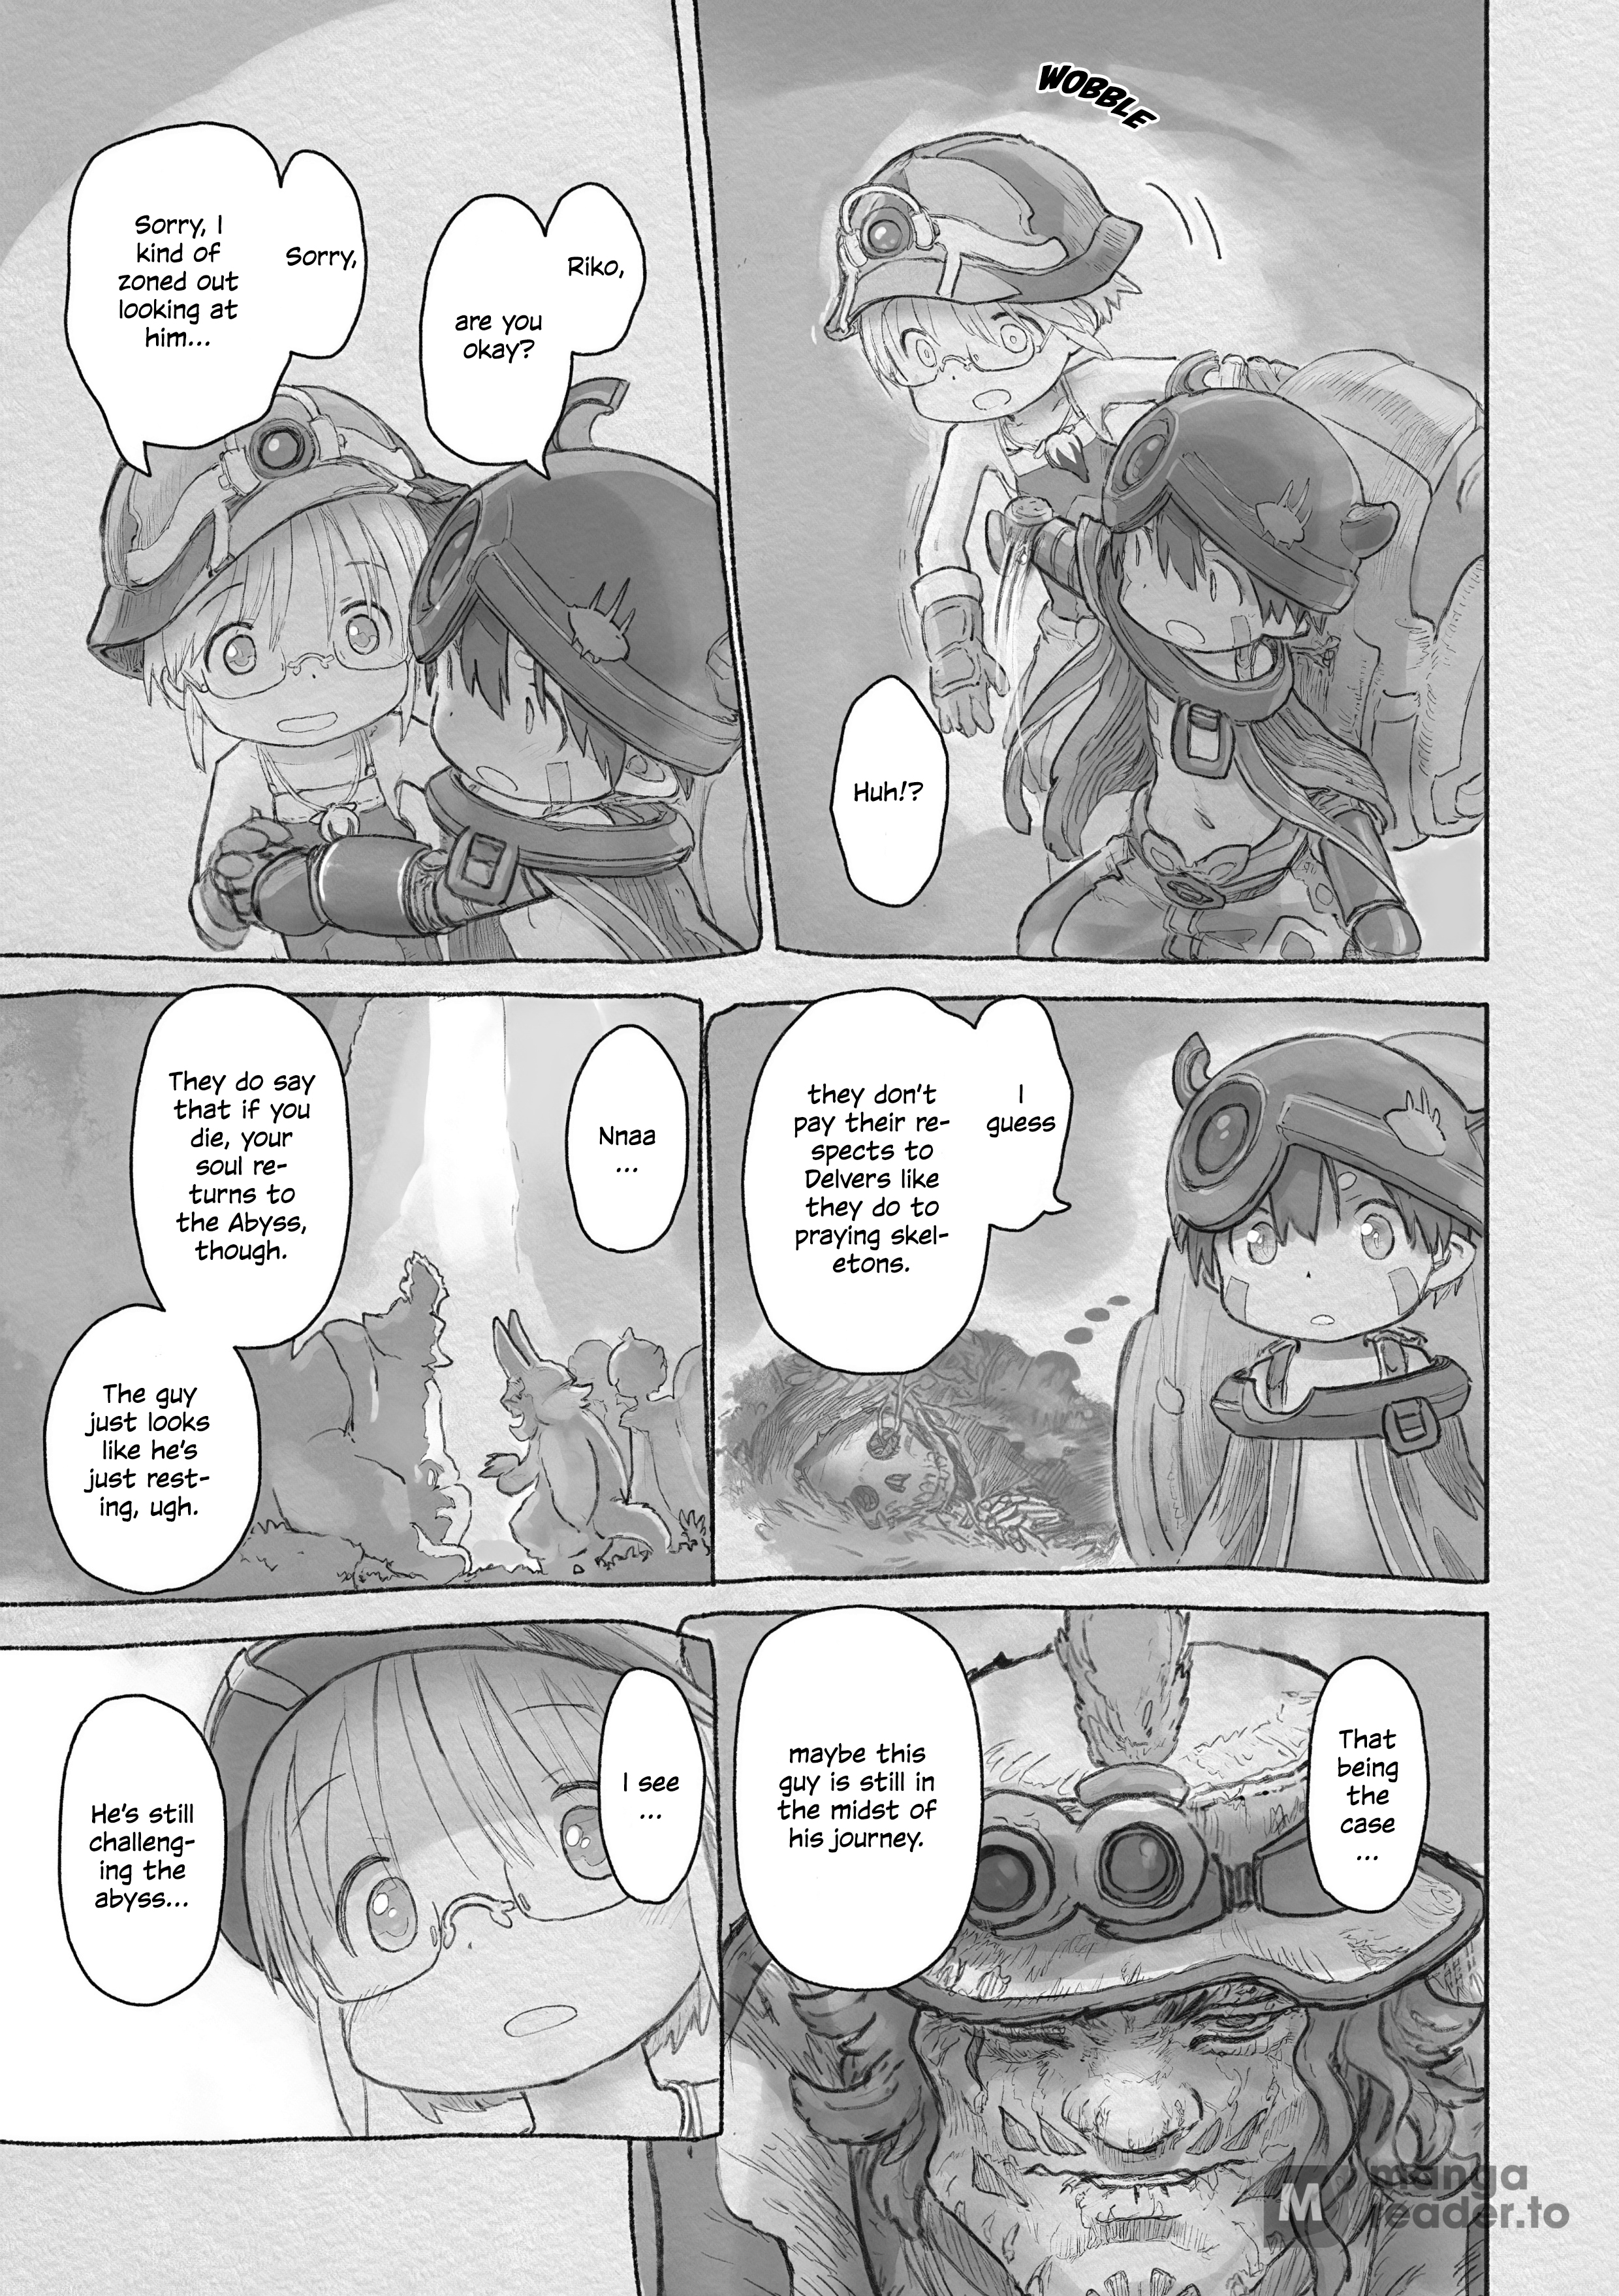 Made In Abyss Chapter 62 Made in Abyss, Chapter 62 - Made in Abyss Manga Online